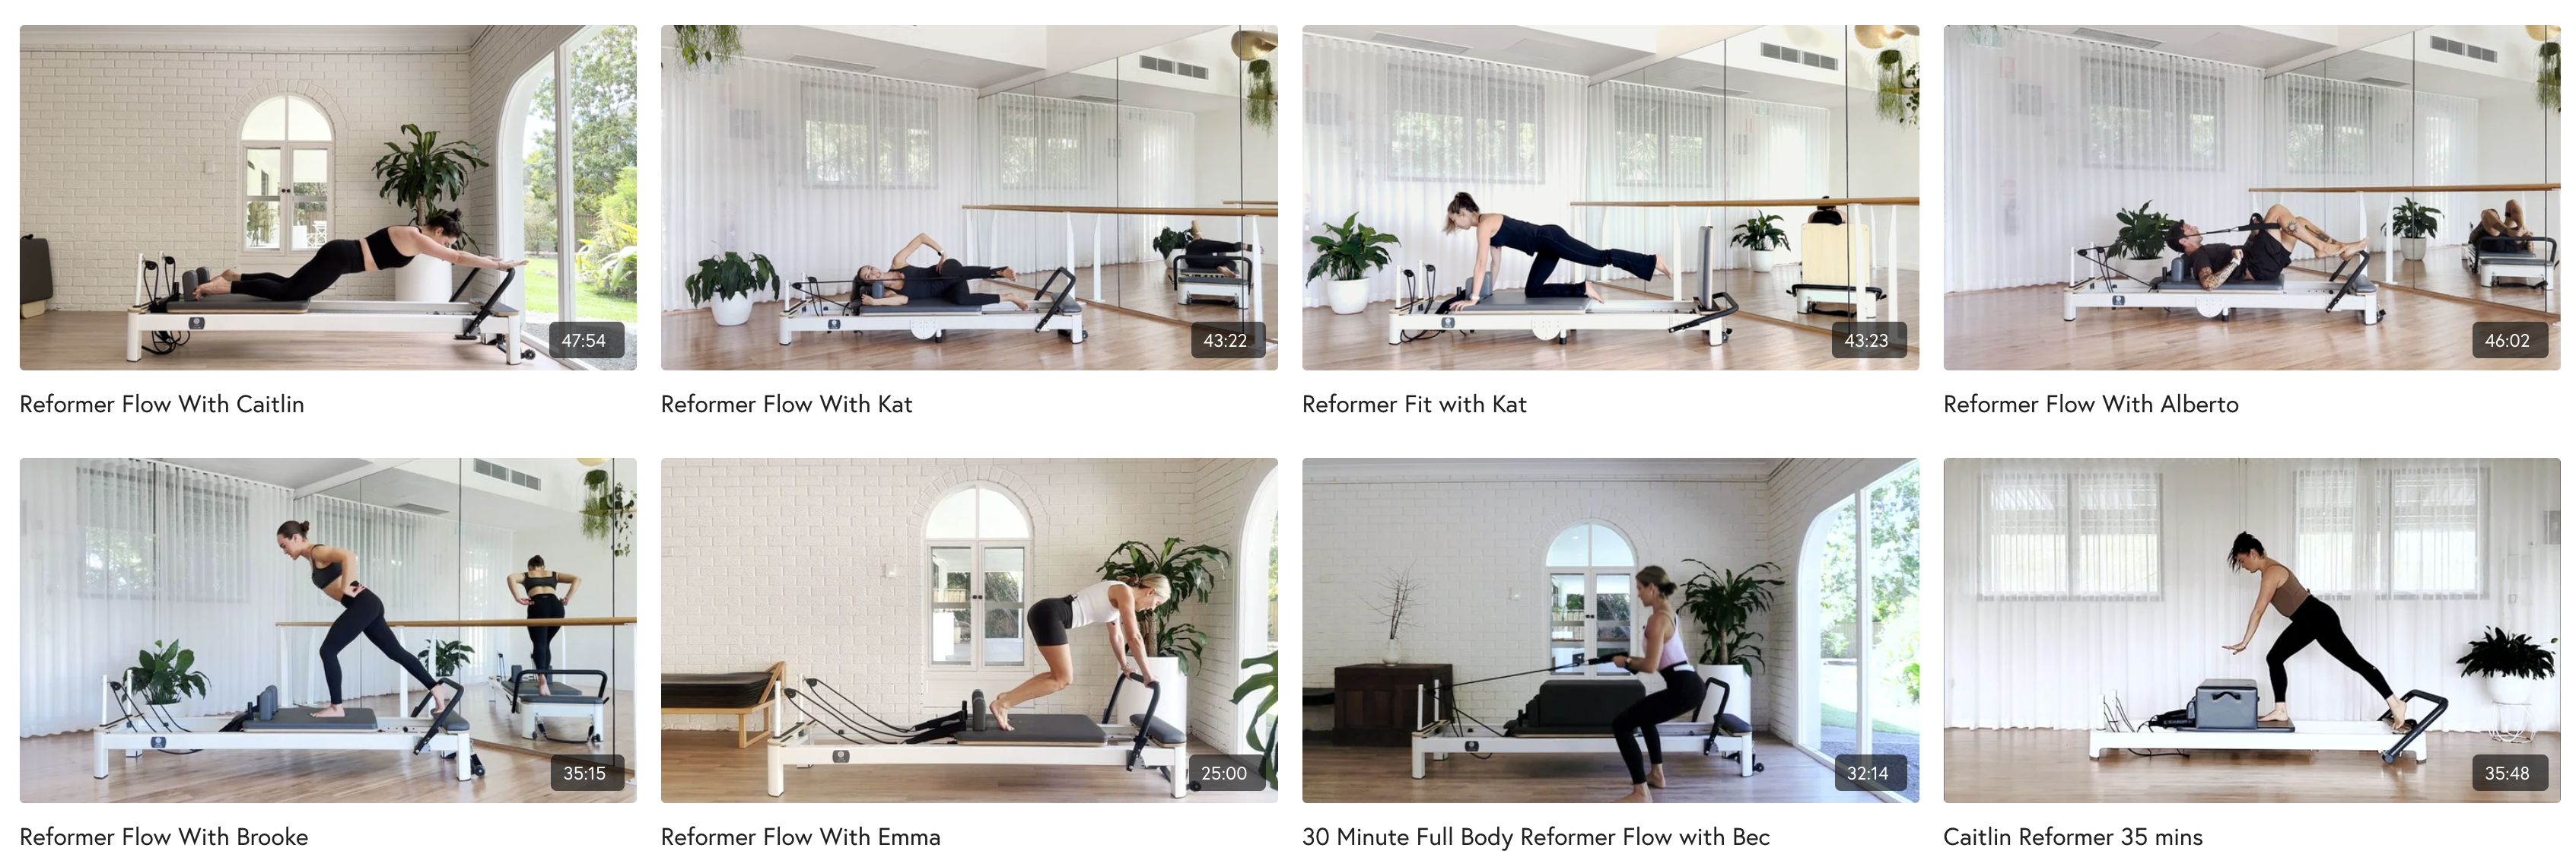 Online workout for Aldi Reformer Machine and other at home reformers